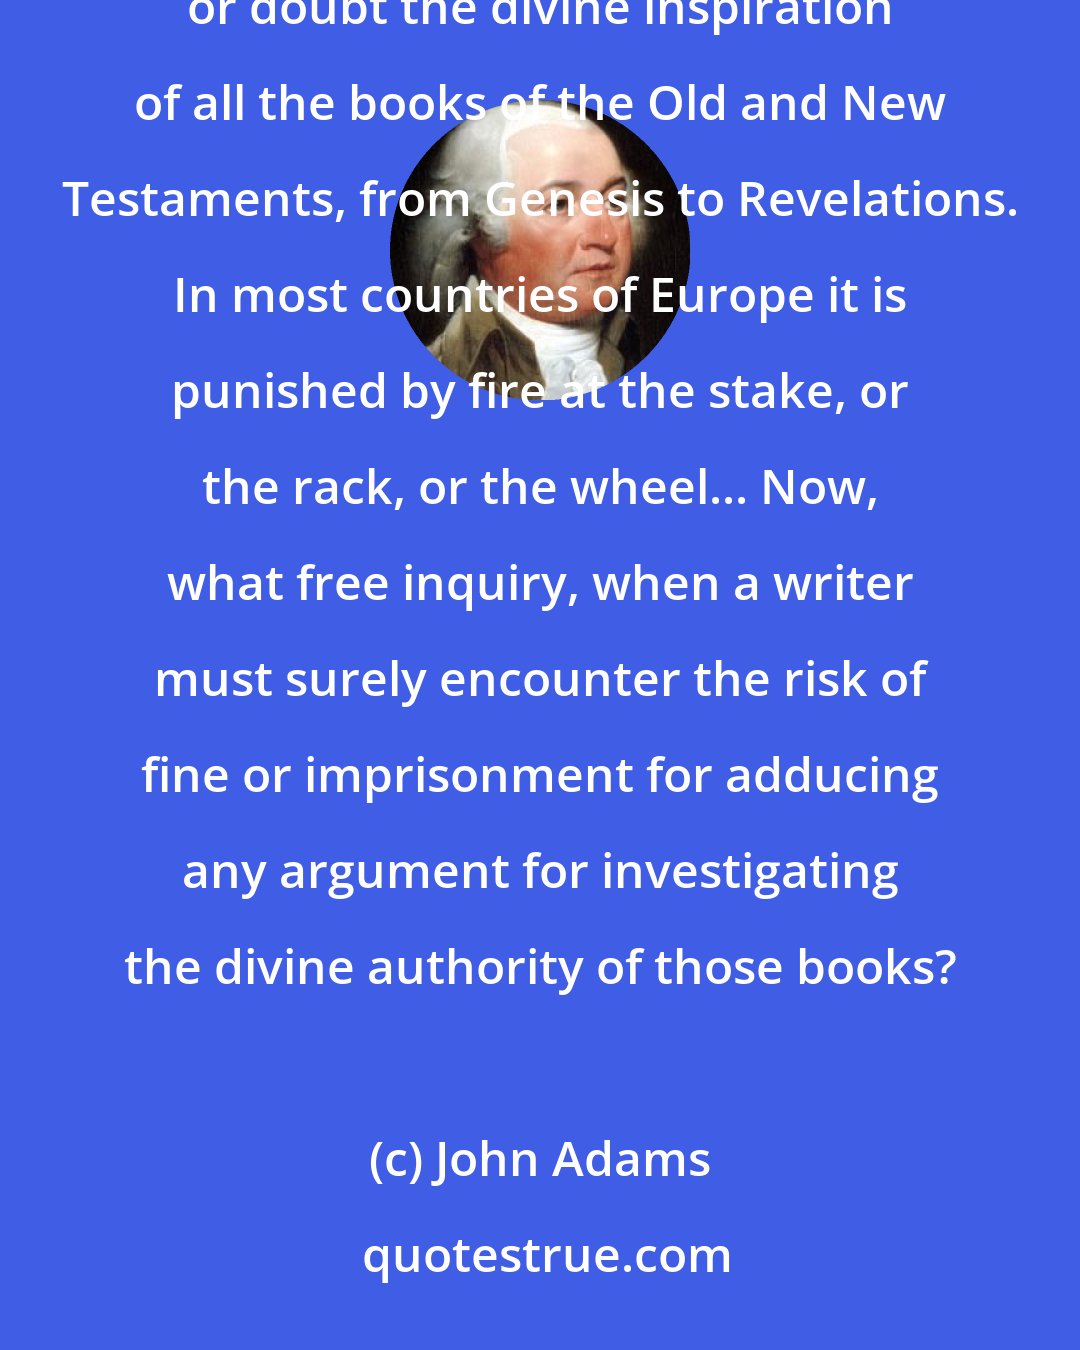 John Adams: There exists, I believe, throughout the whole Christian world, a law which makes it blasphemy to deny or doubt the divine inspiration of all the books of the Old and New Testaments, from Genesis to Revelations. In most countries of Europe it is punished by fire at the stake, or the rack, or the wheel... Now, what free inquiry, when a writer must surely encounter the risk of fine or imprisonment for adducing any argument for investigating the divine authority of those books?